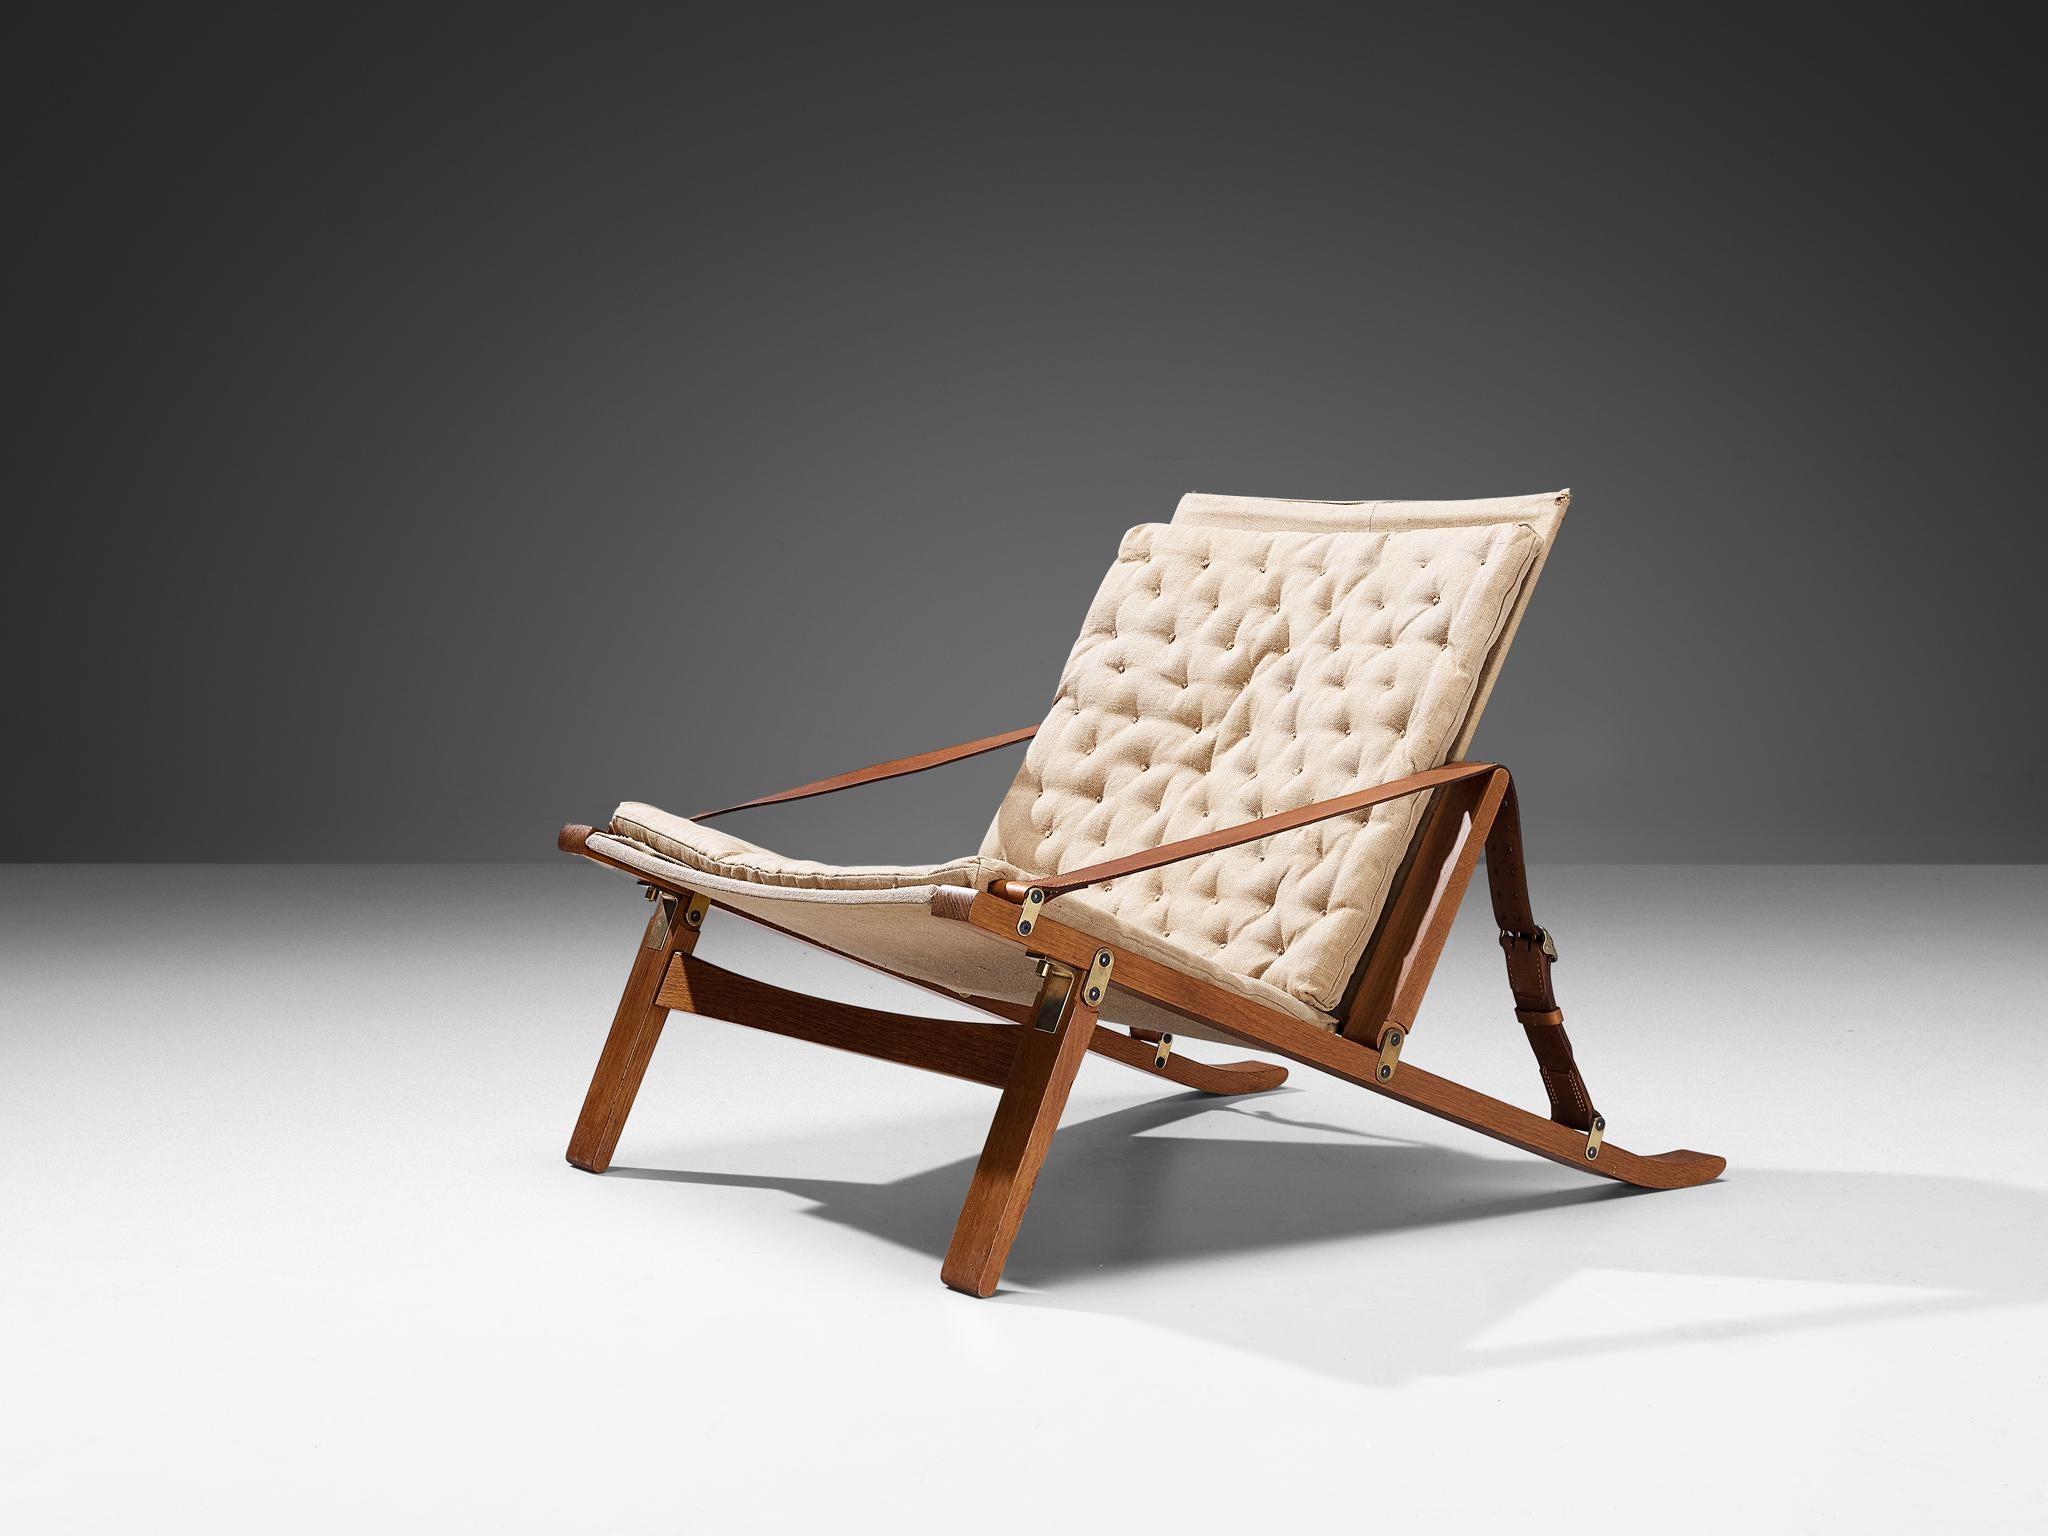 Jørgen Kastholm & Preben Fabricius for Poul Bachmann, folding lounge chair, model ‘PB10’, oak, leather, canvas, brass, steel, rope, Denmark, 1963. 

Crafted in 1963 by the skilled cabinetmaker Poul Bachmann, this folding easy chair bears the design